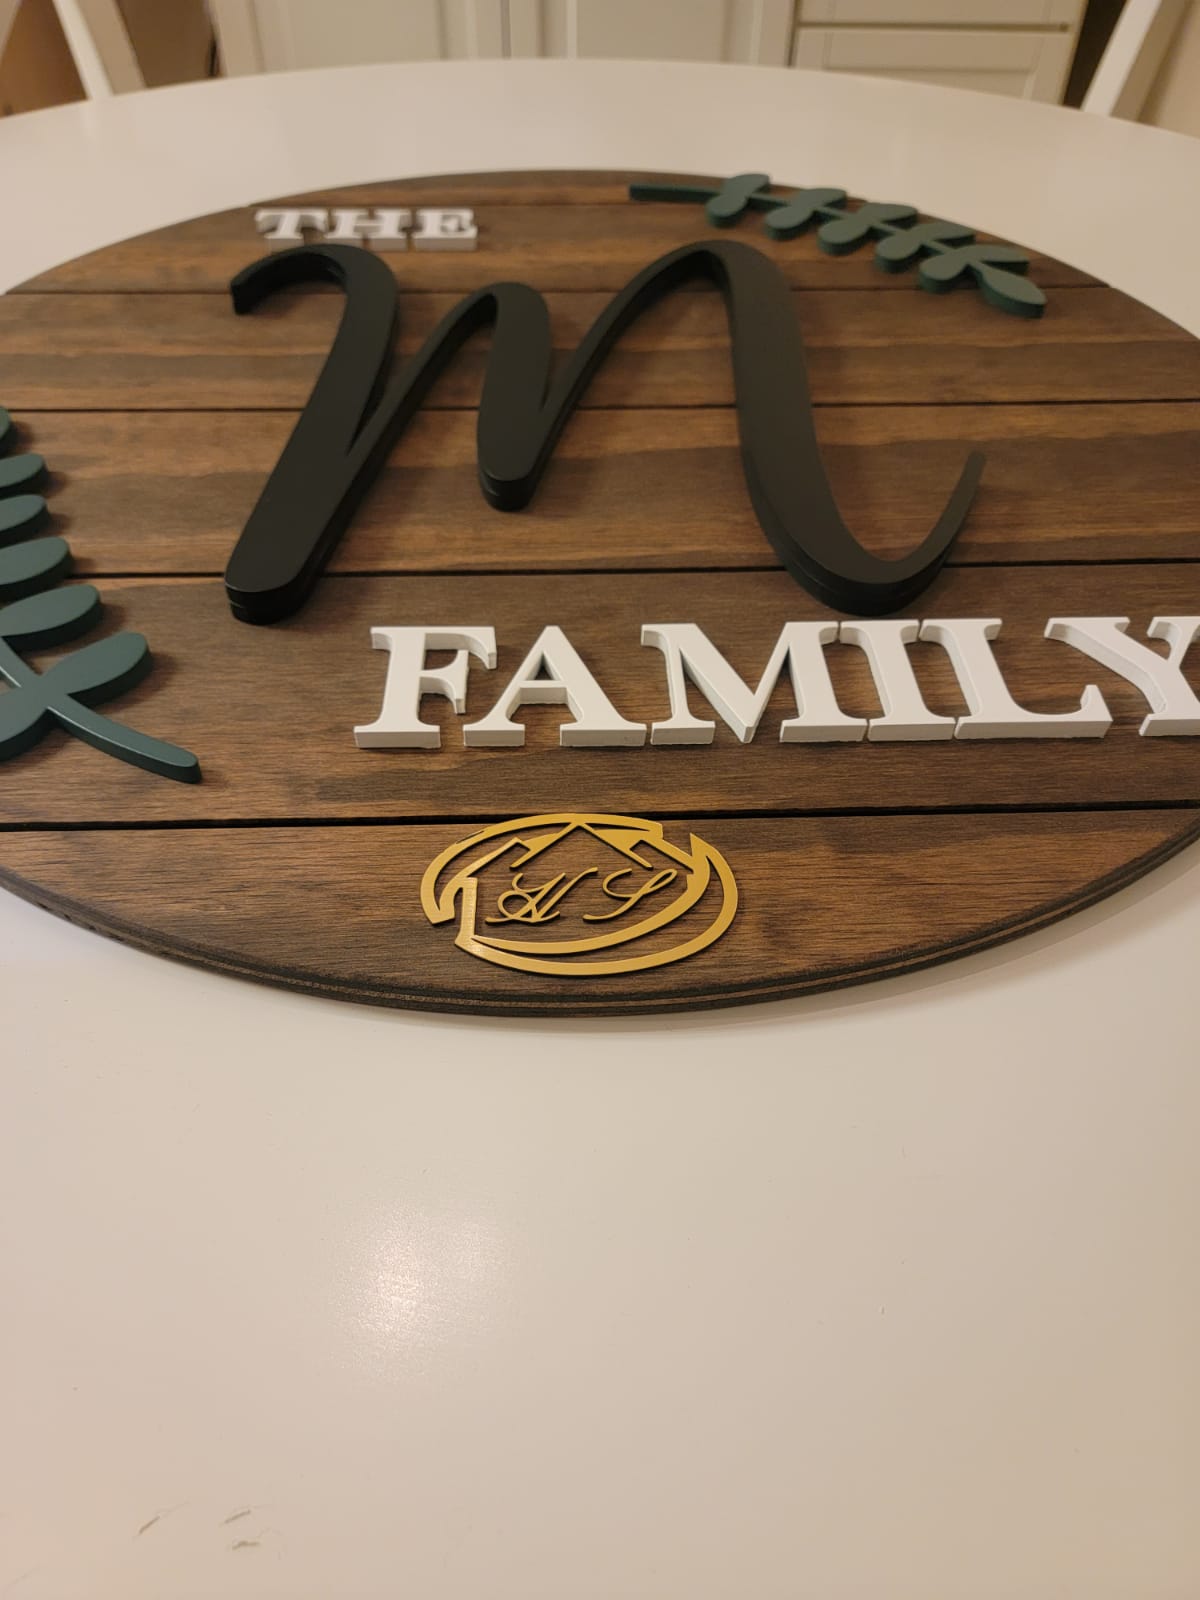 Family round sign with